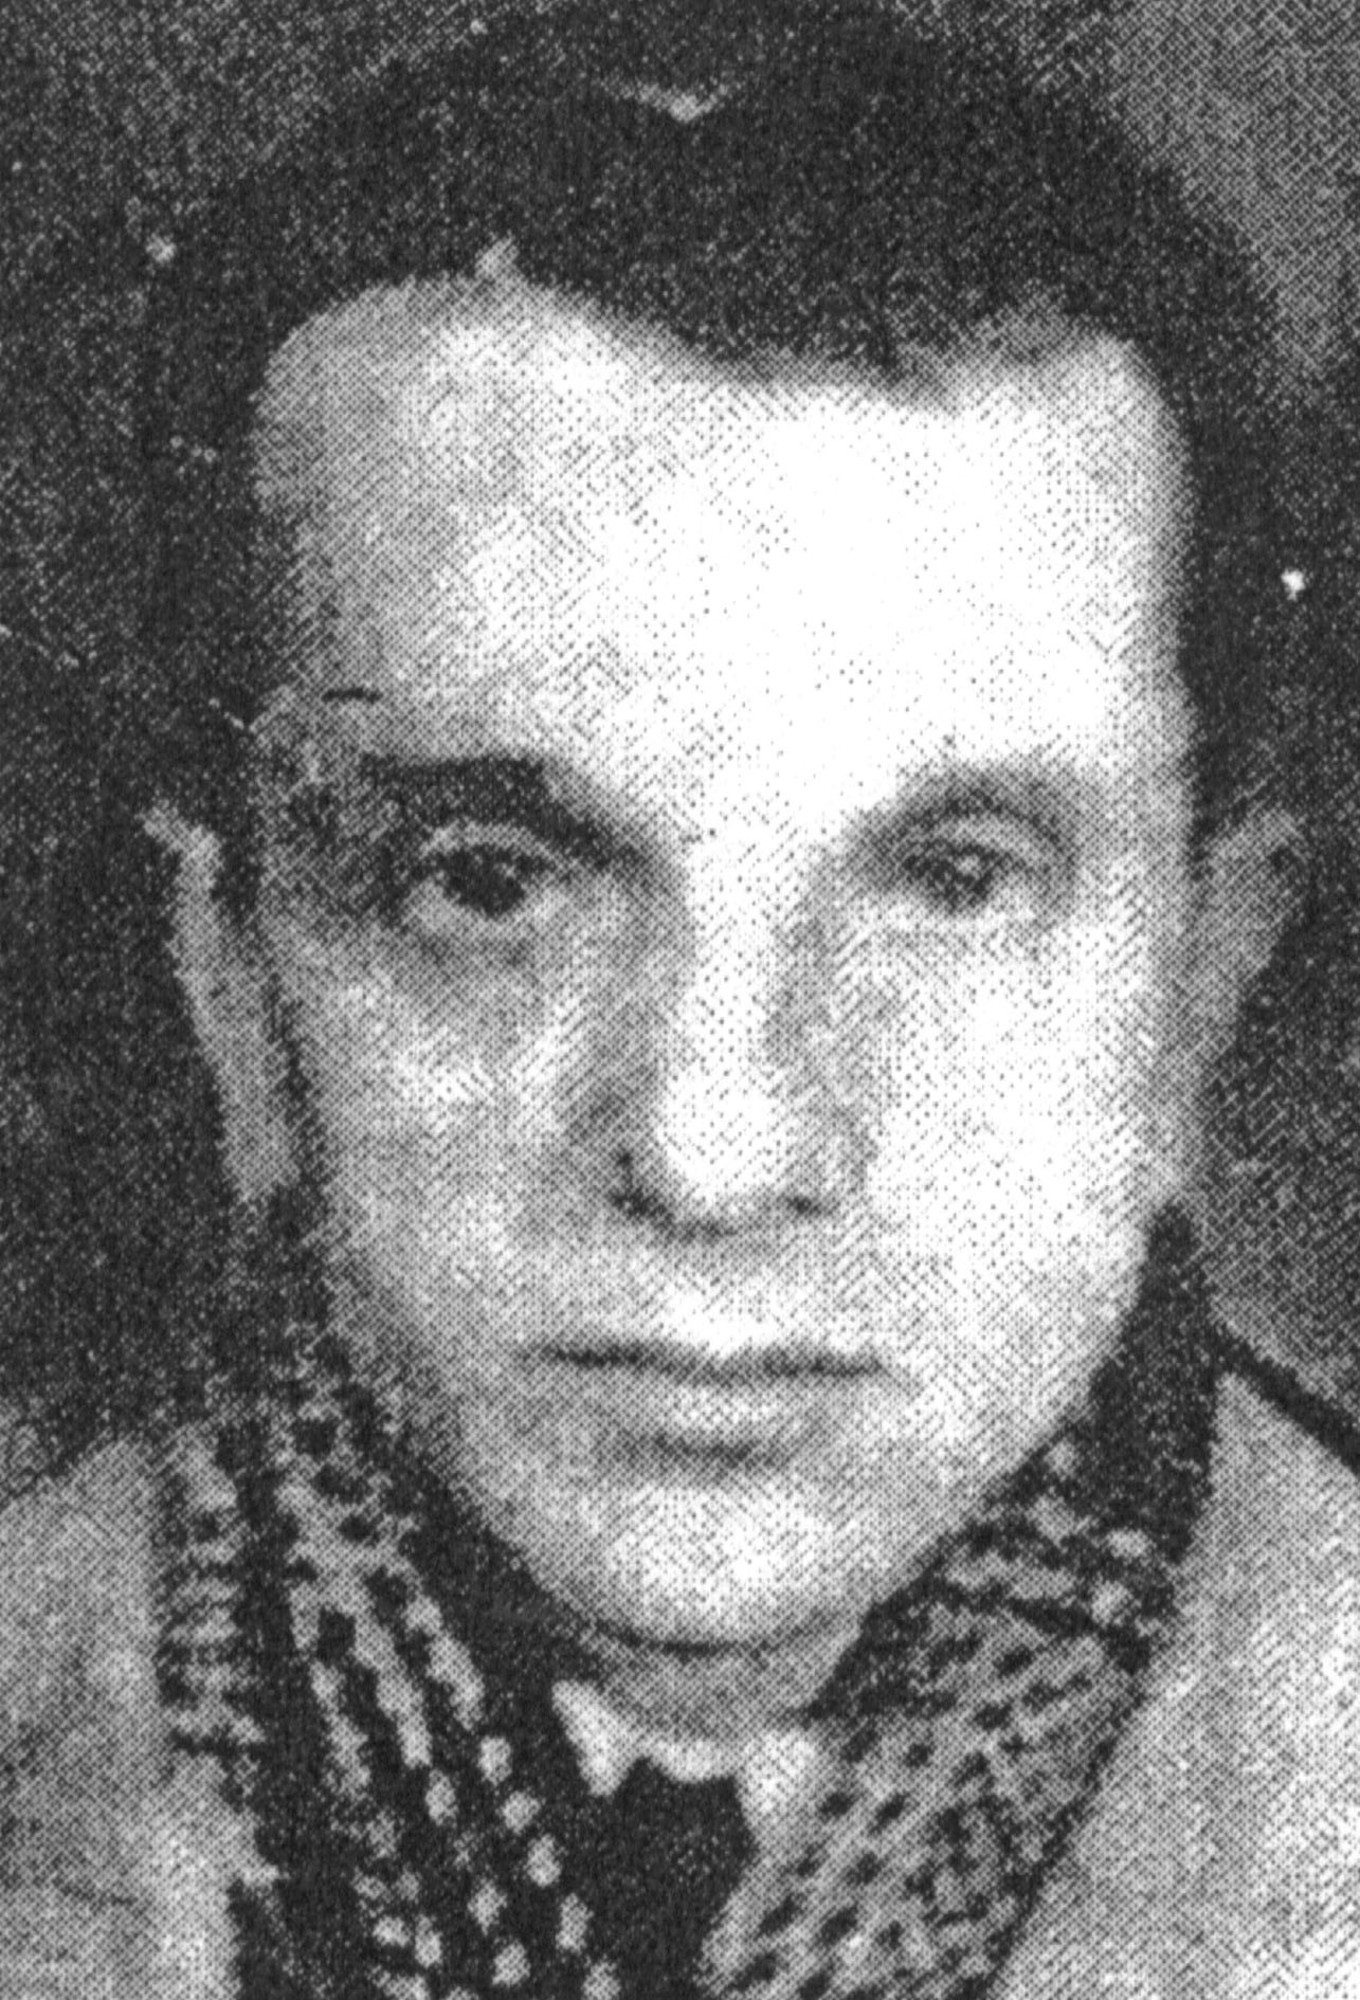 Aurel Baghiu in 1963, shortly after his release